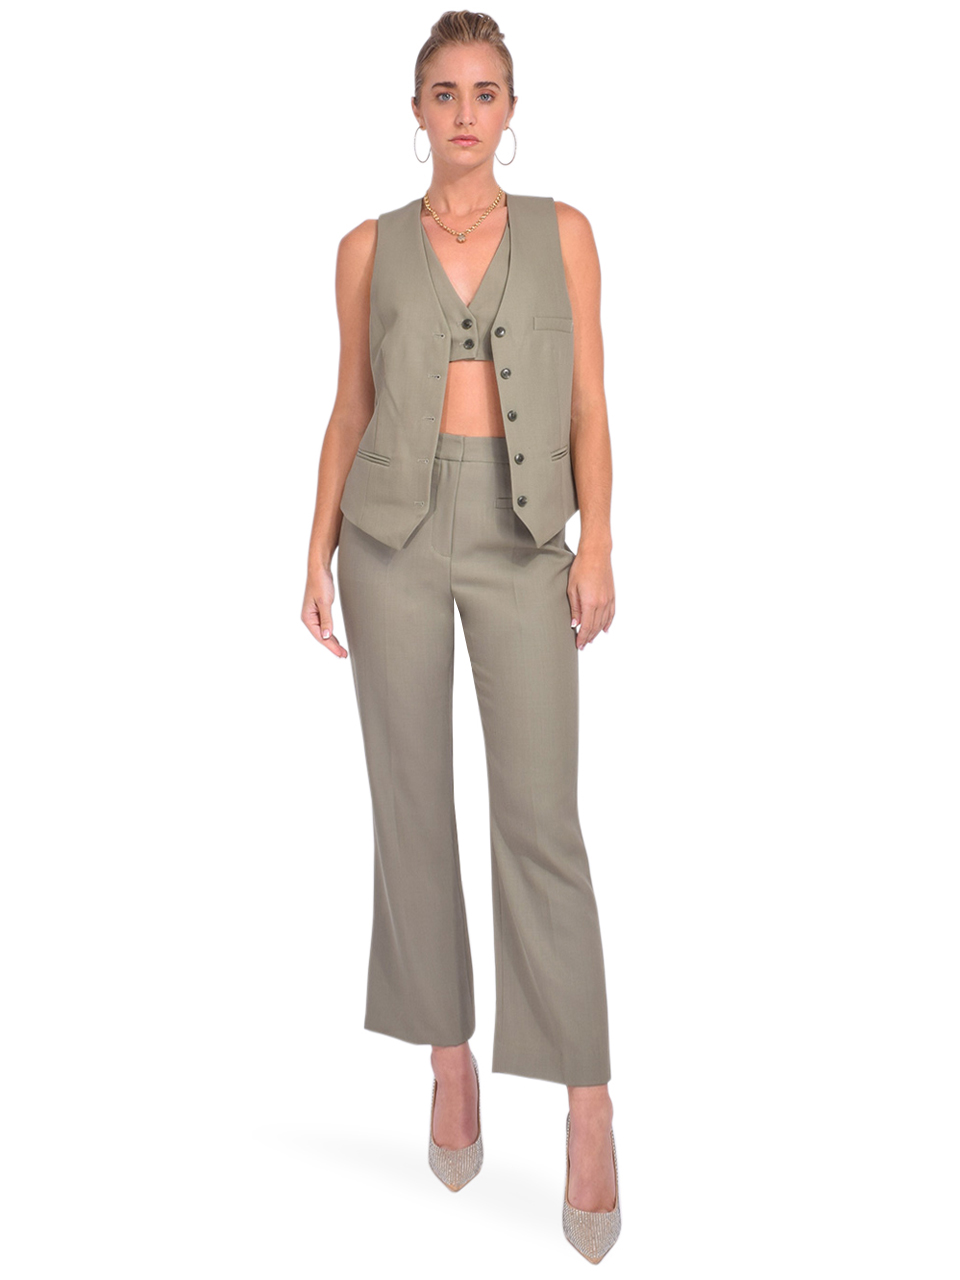 3.1 Phillip Lim Tailored Vest with Set in Bra in Thyme Full Outfit Unbuttoned 
